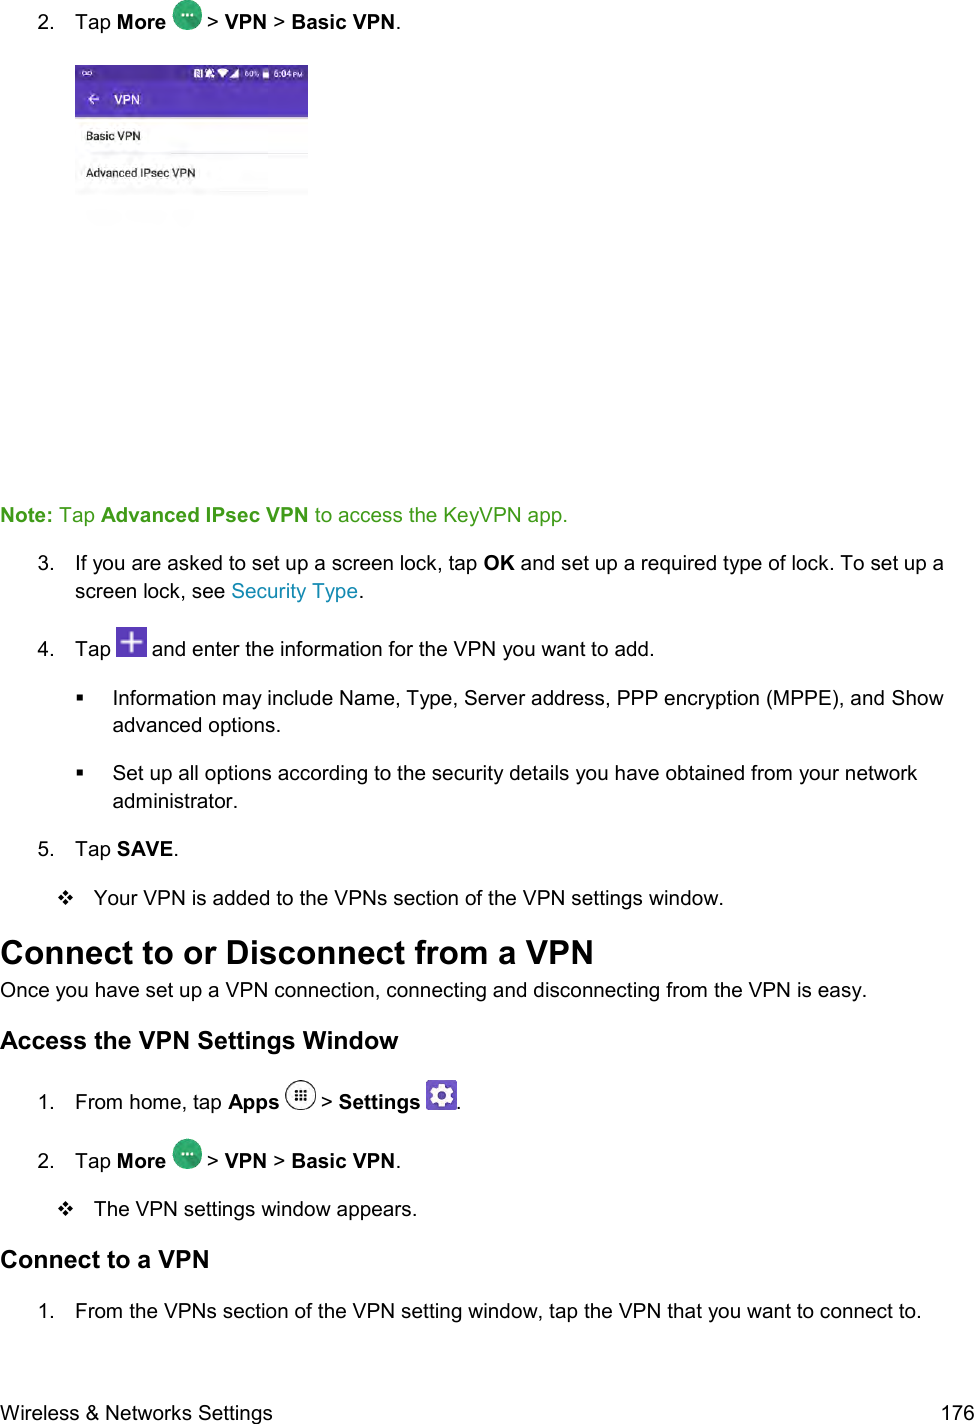  Wireless &amp; Networks Settings  176 2.  Tap More   &gt; VPN &gt; Basic VPN.   Note: Tap Advanced IPsec VPN to access the KeyVPN app. 3.  If you are asked to set up a screen lock, tap OK and set up a required type of lock. To set up a screen lock, see Security Type. 4.  Tap   and enter the information for the VPN you want to add.   Information may include Name, Type, Server address, PPP encryption (MPPE), and Show advanced options.   Set up all options according to the security details you have obtained from your network administrator. 5.  Tap SAVE.    Your VPN is added to the VPNs section of the VPN settings window. Connect to or Disconnect from a VPN Once you have set up a VPN connection, connecting and disconnecting from the VPN is easy. Access the VPN Settings Window 1.  From home, tap Apps   &gt; Settings  .  2.  Tap More  &gt; VPN &gt; Basic VPN.    The VPN settings window appears. Connect to a VPN 1.  From the VPNs section of the VPN setting window, tap the VPN that you want to connect to.  